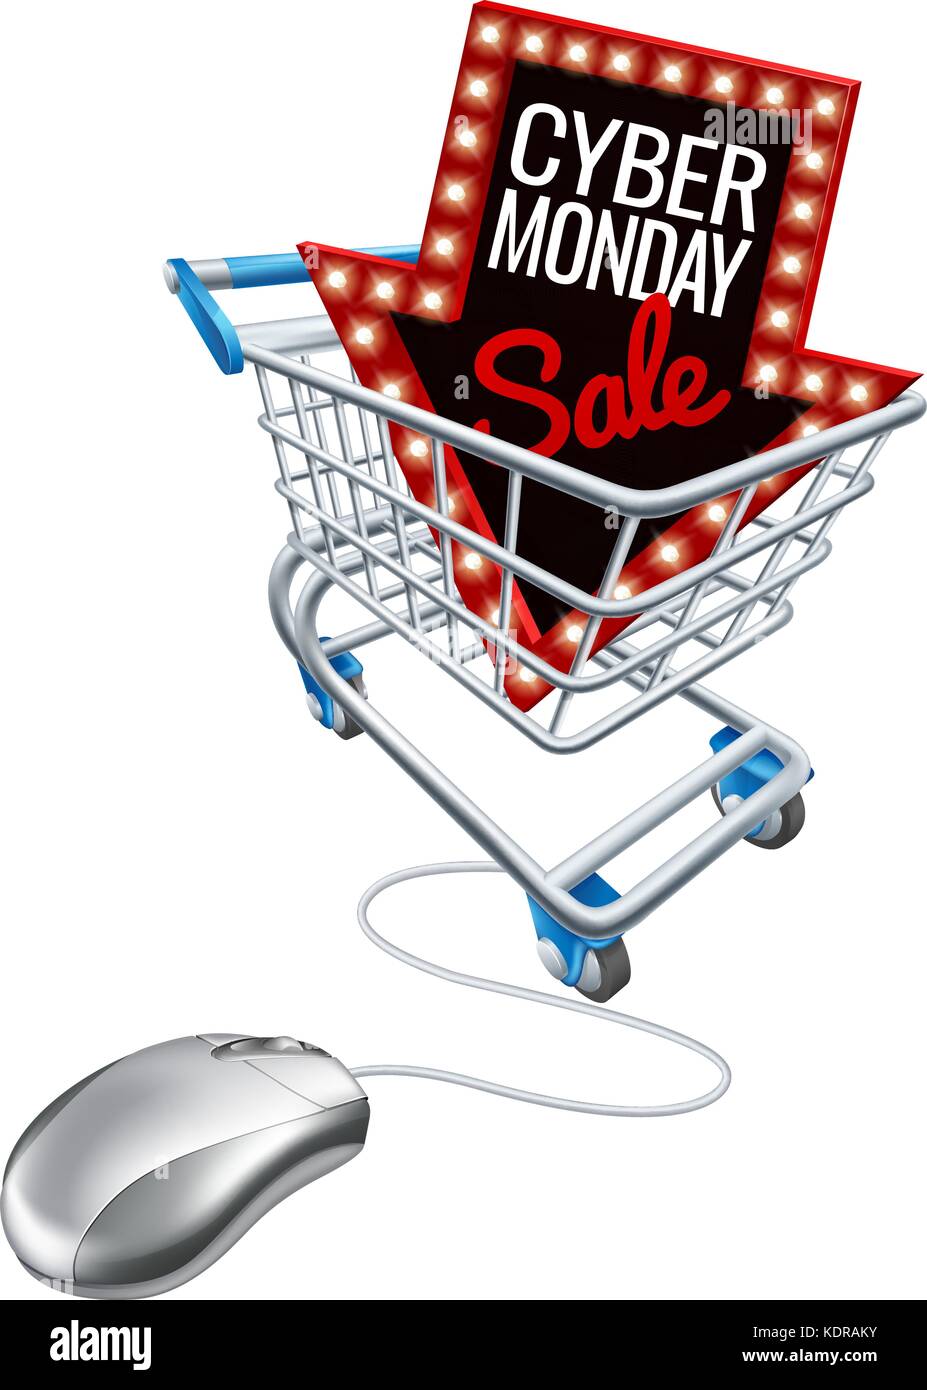 Cyber Monday Sale Online Trolley Computer Mouse Stock Vector